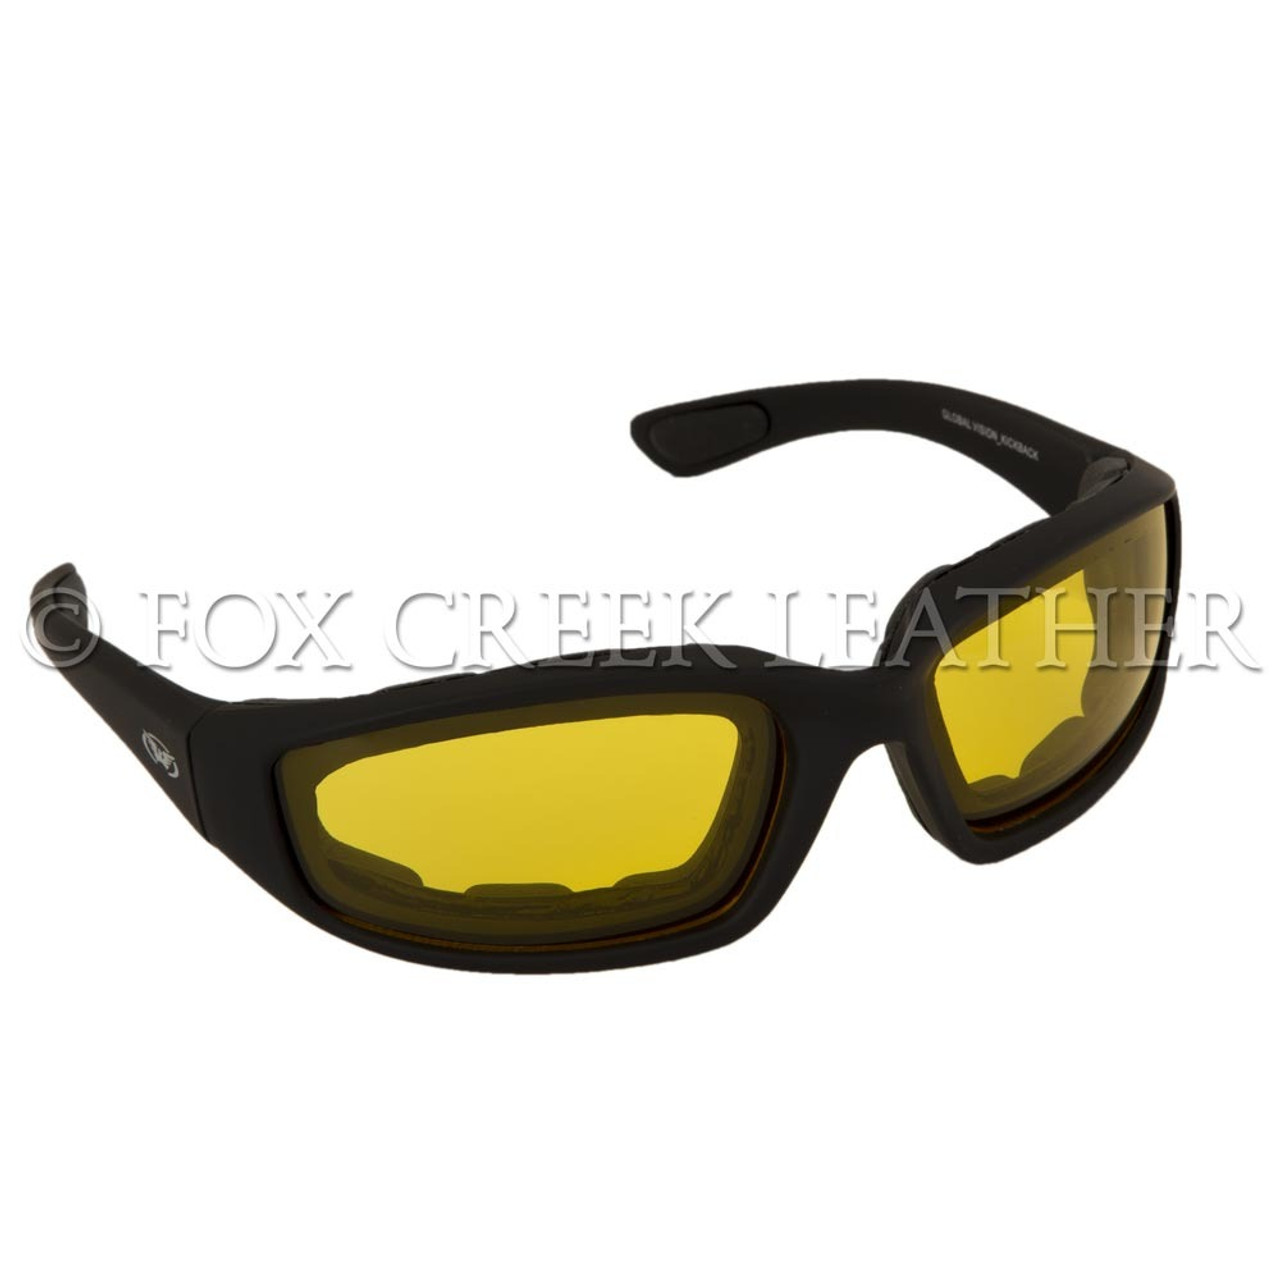 Outfitter Padded Motorcycle Glasses Fits Over Glasses Yellow Lens  Pouch & Strap 